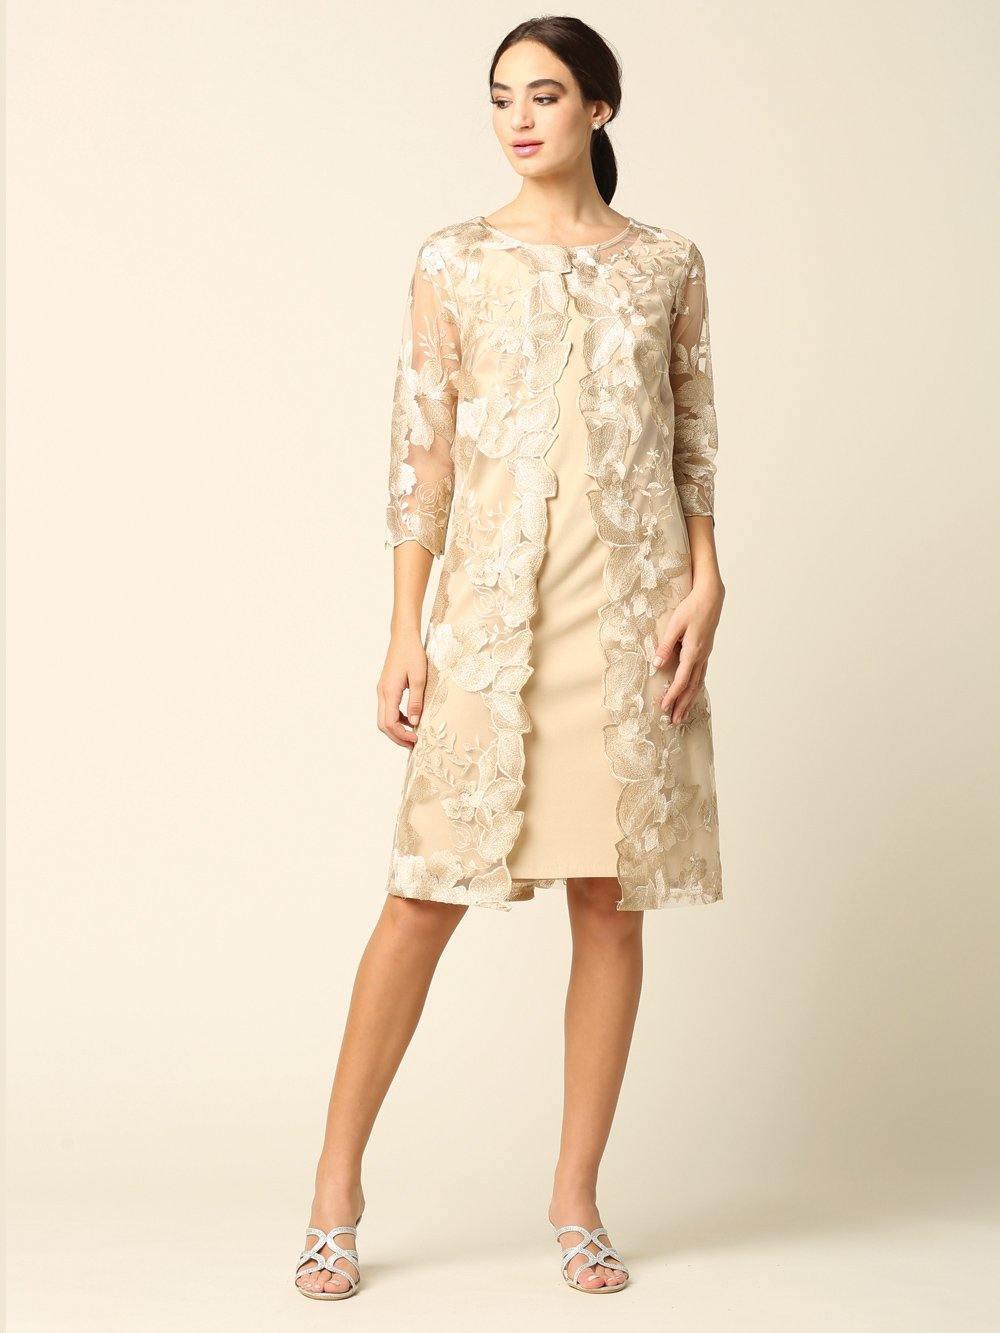 Short Mother of the Bride Chiffon Dress - The Dress Outlet Eva Fashion